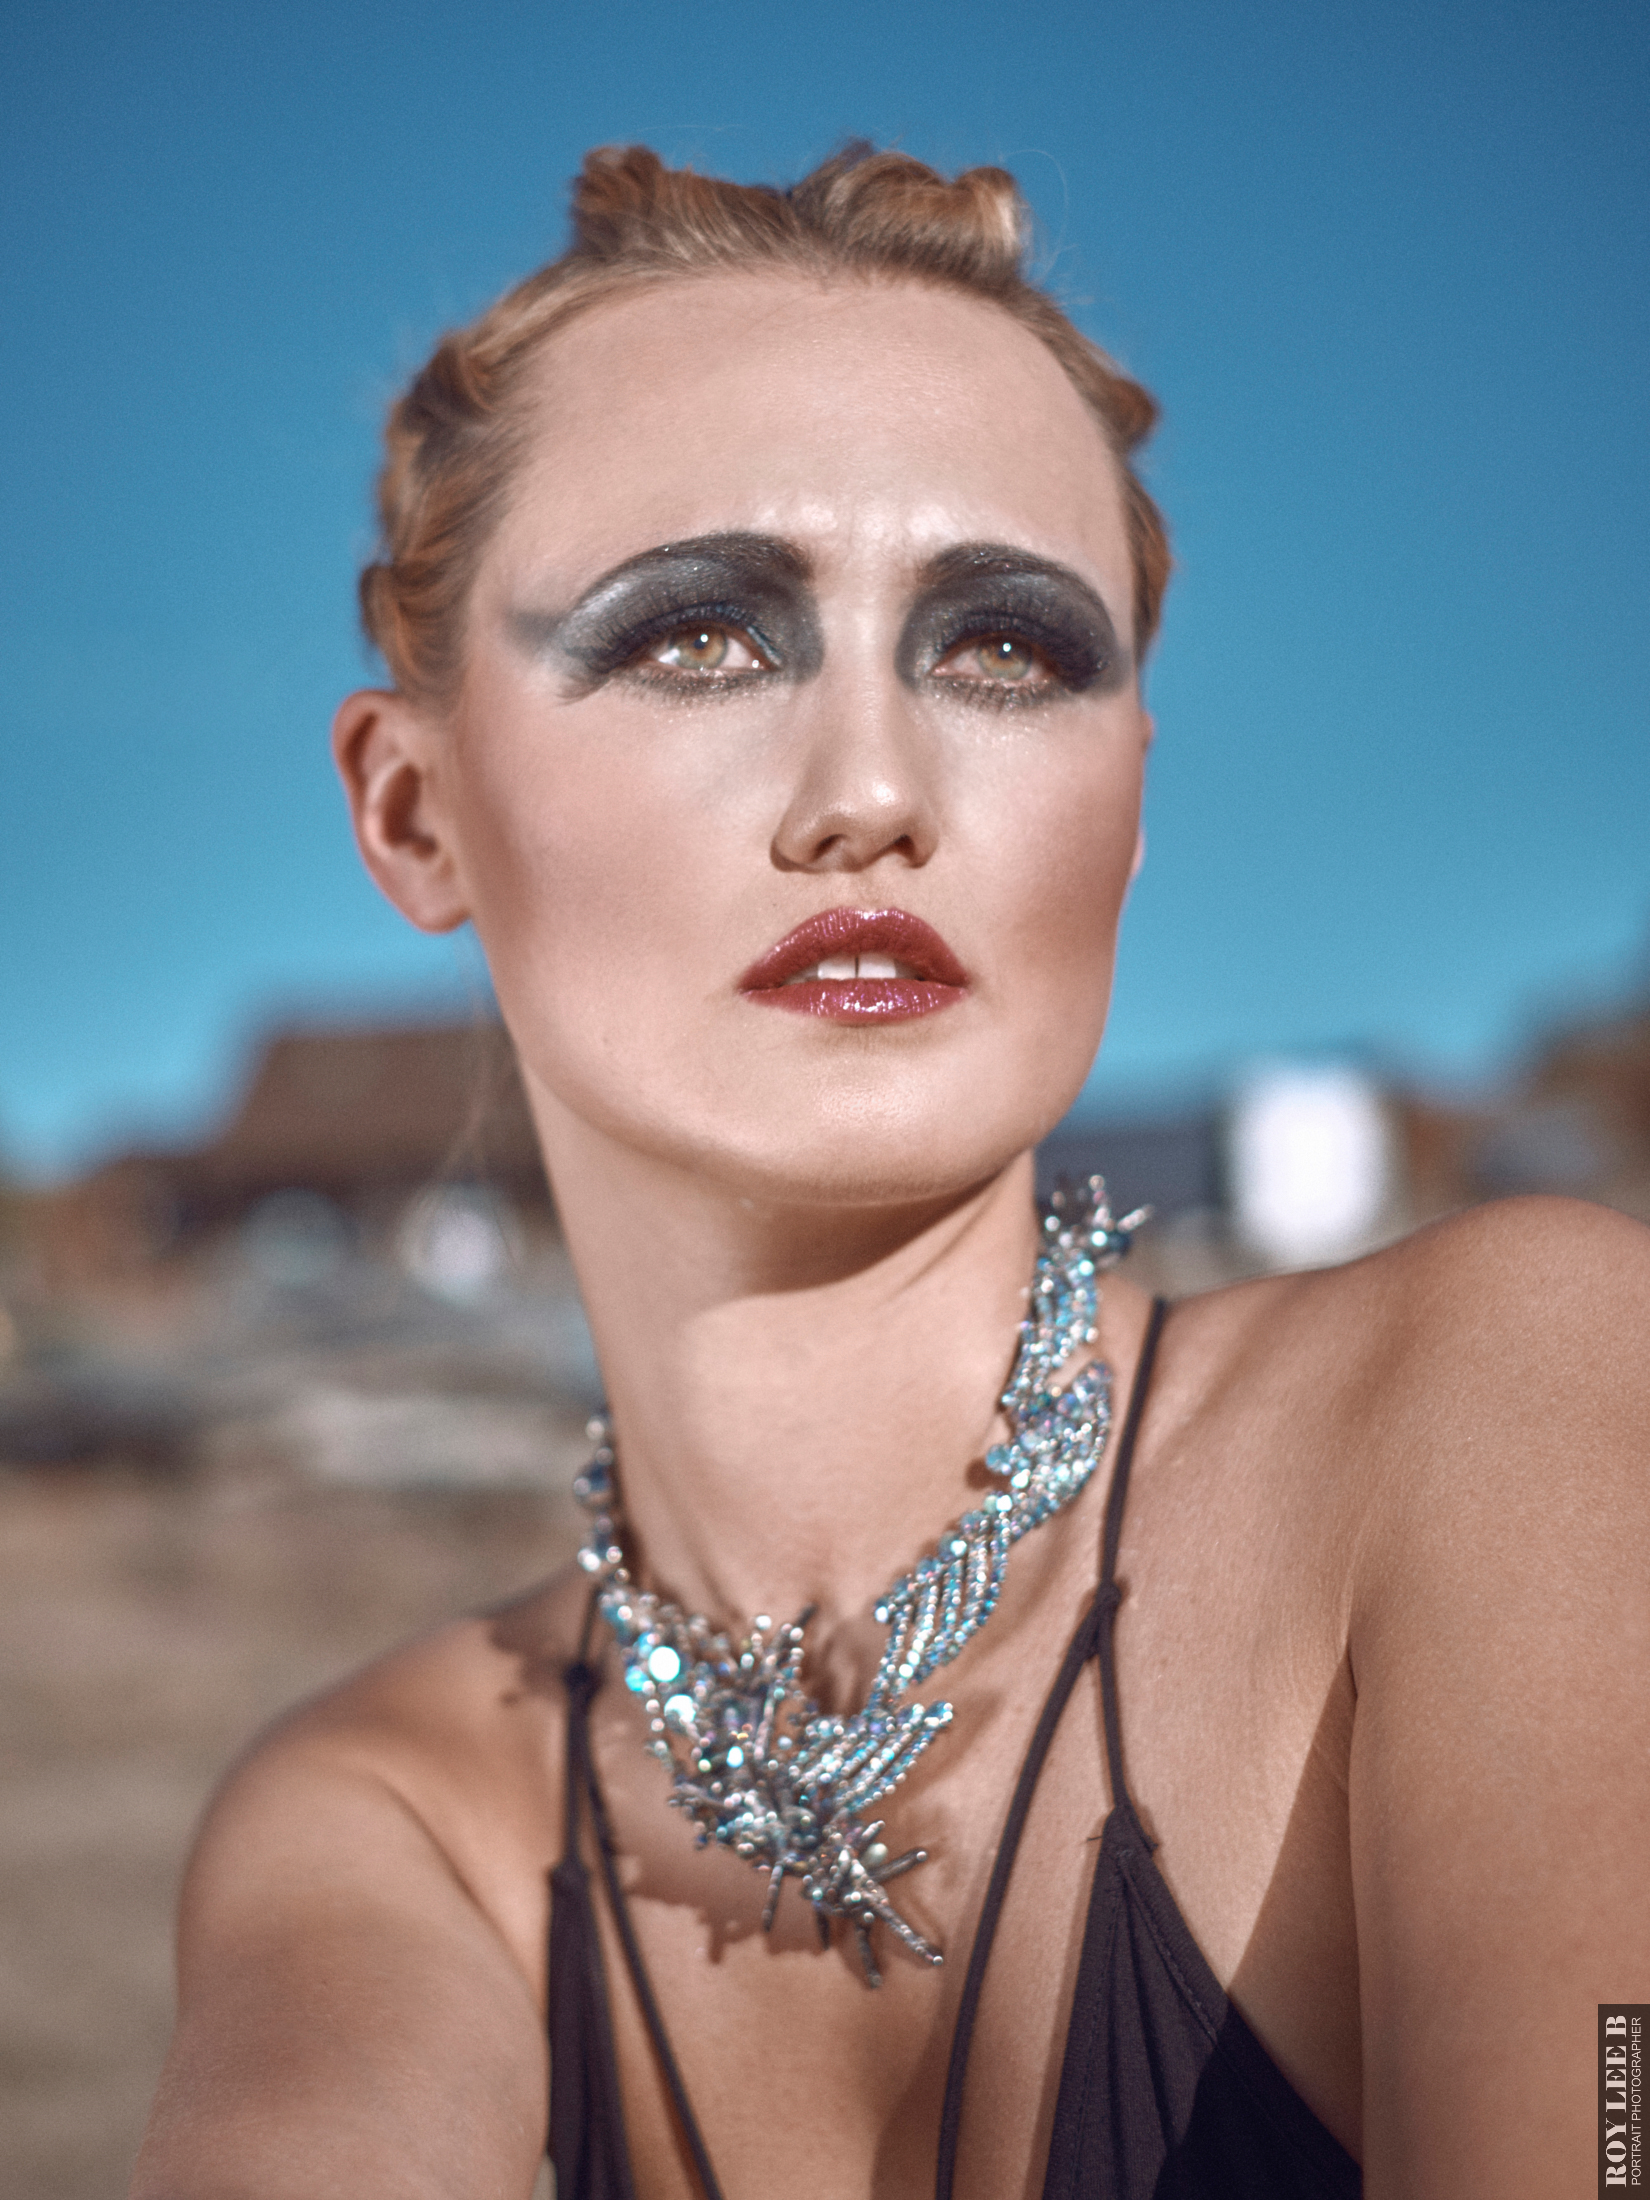 model wearing statement necklace